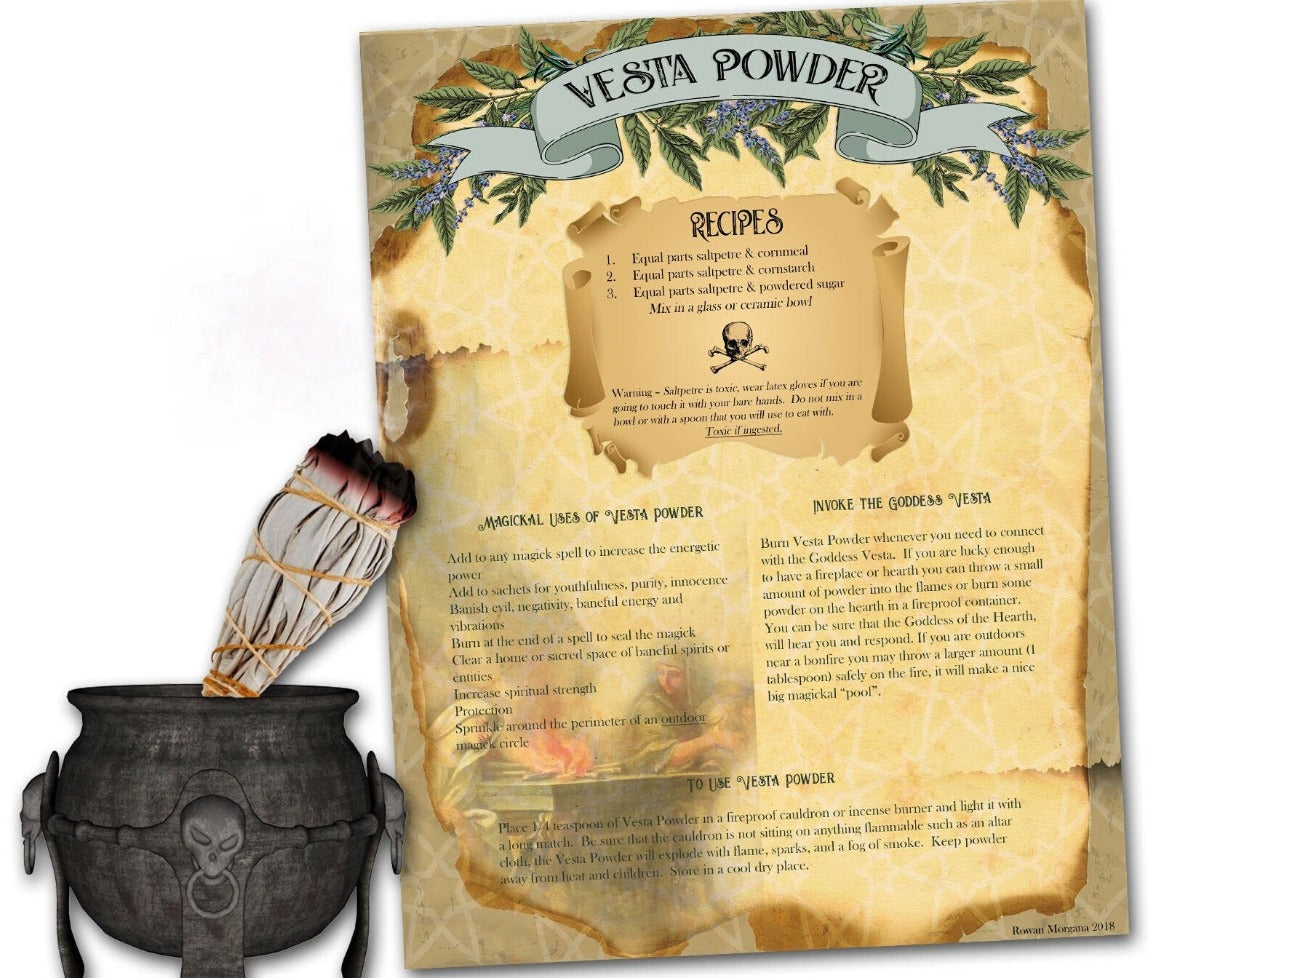 The second Vesta page is a recipe for making Vesta Powder and invoking the Goddess.